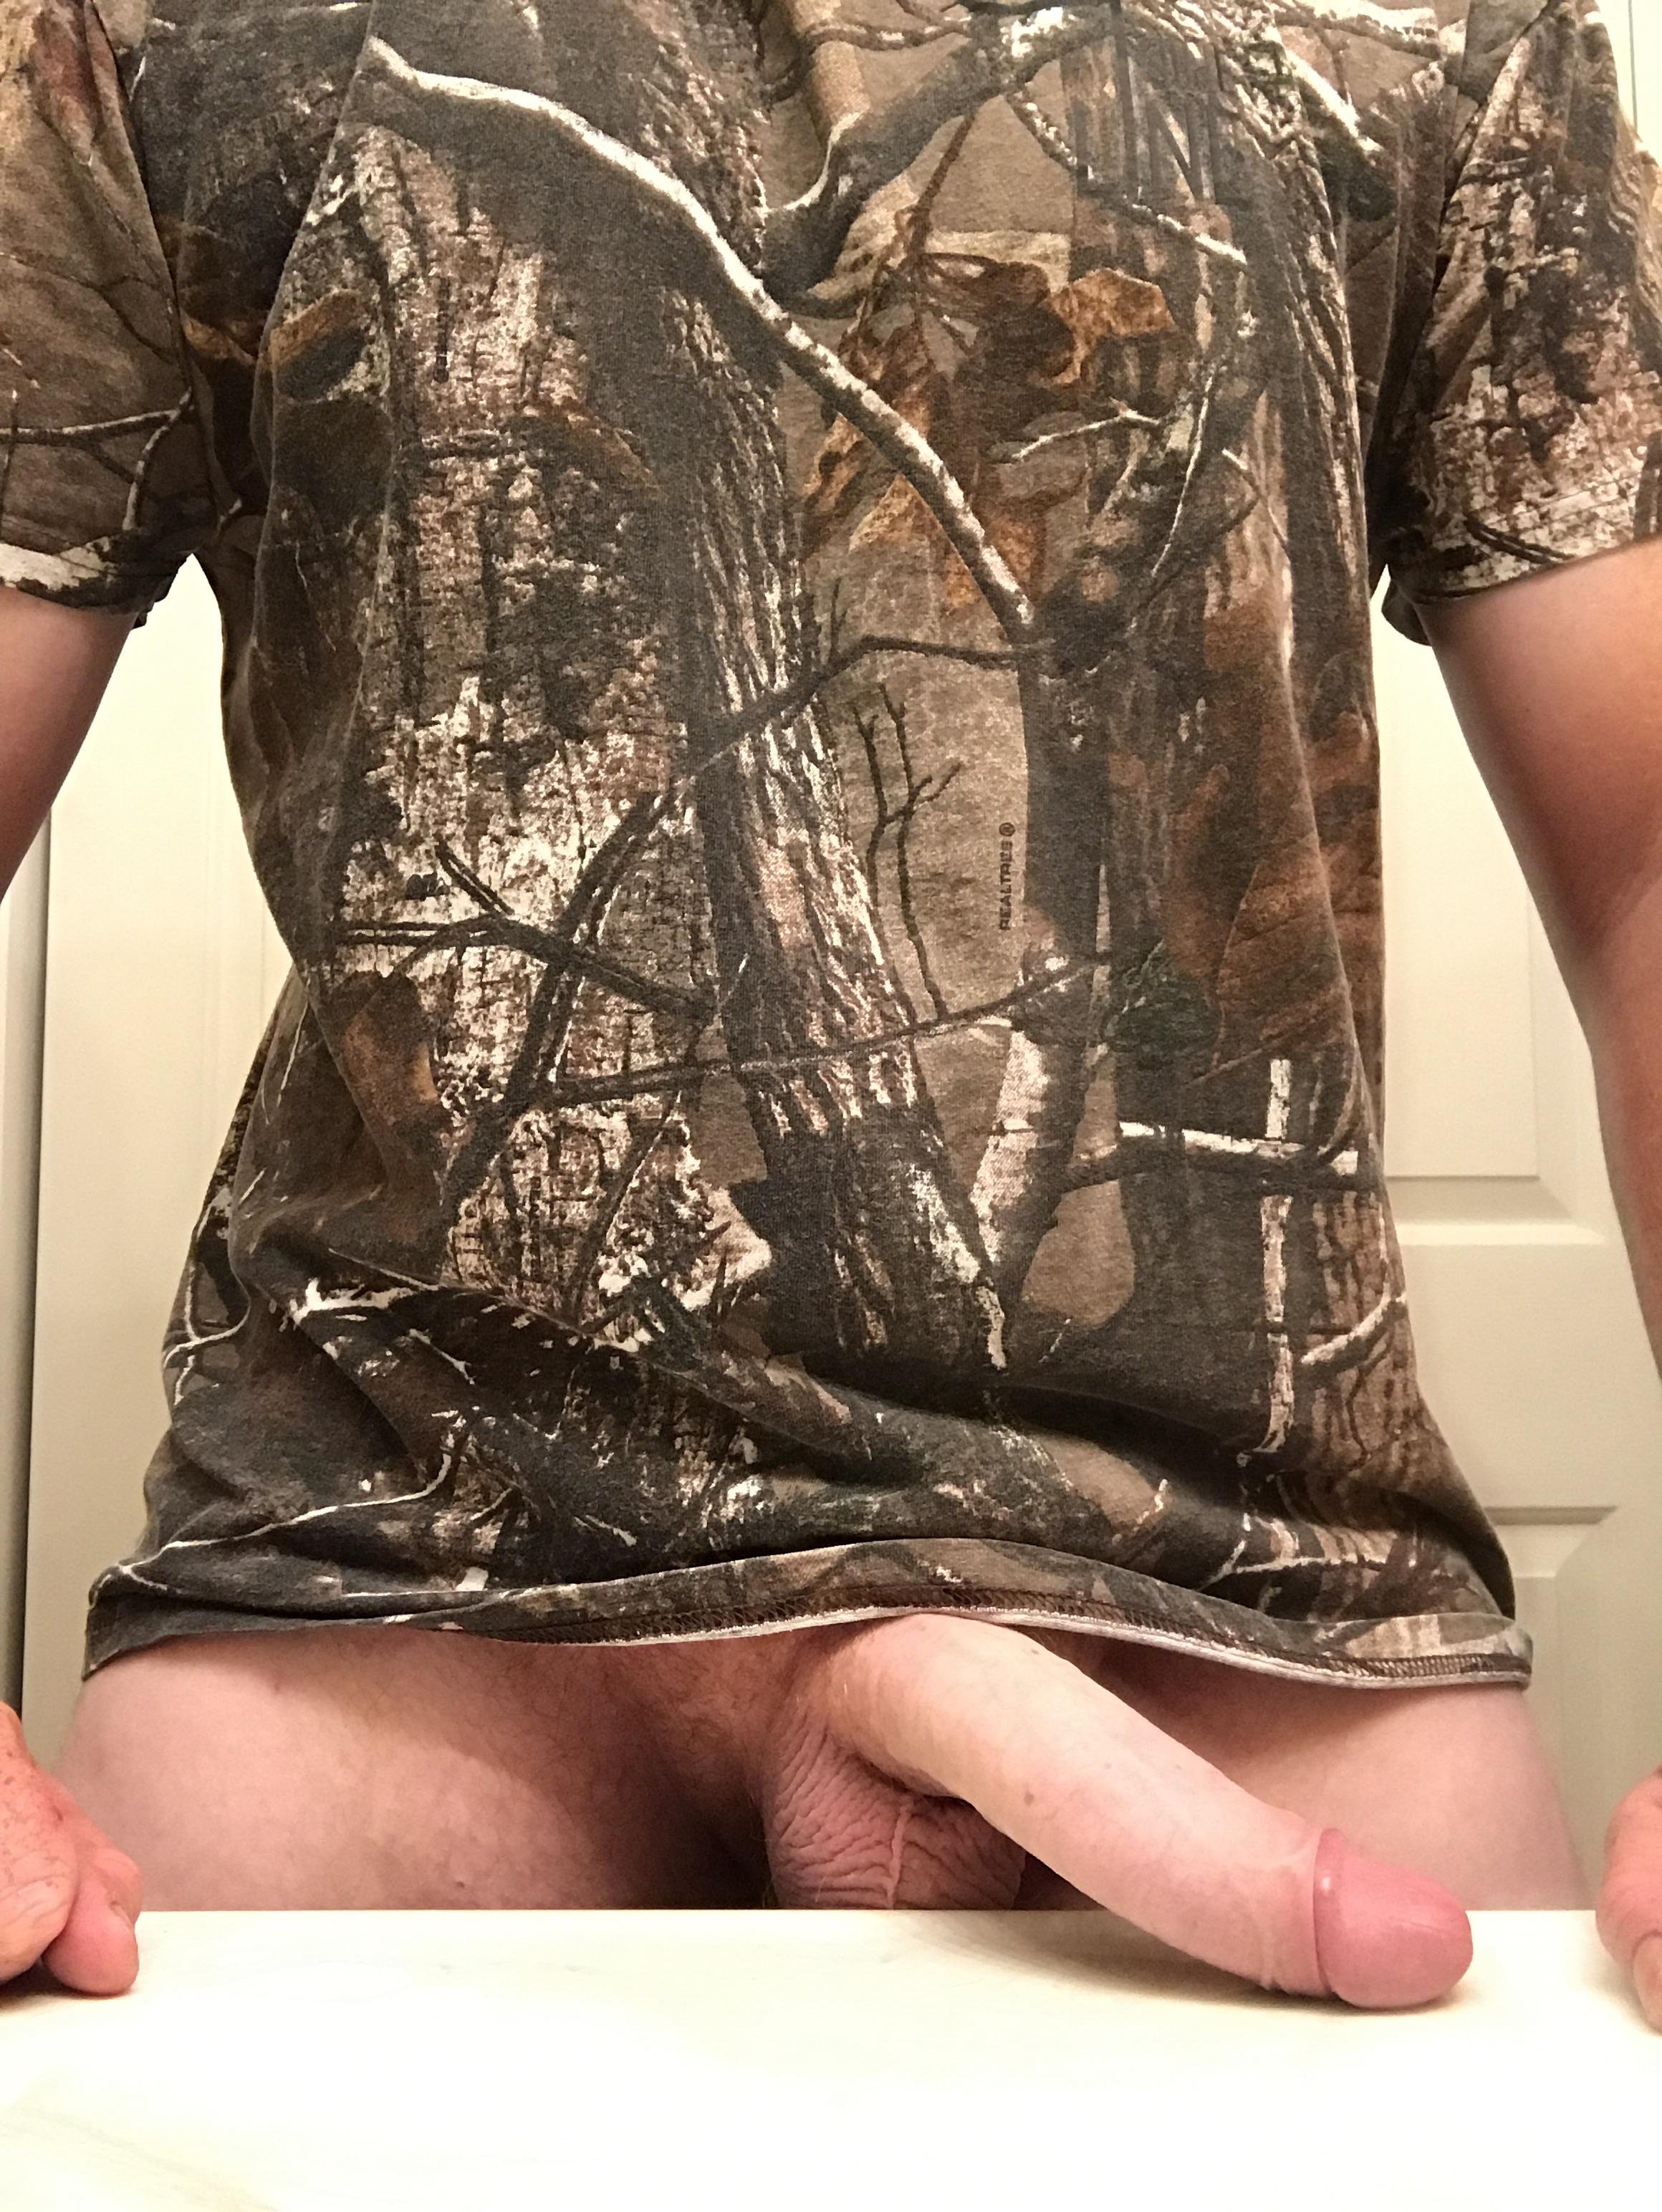 Cock and camo. Foreskin back.